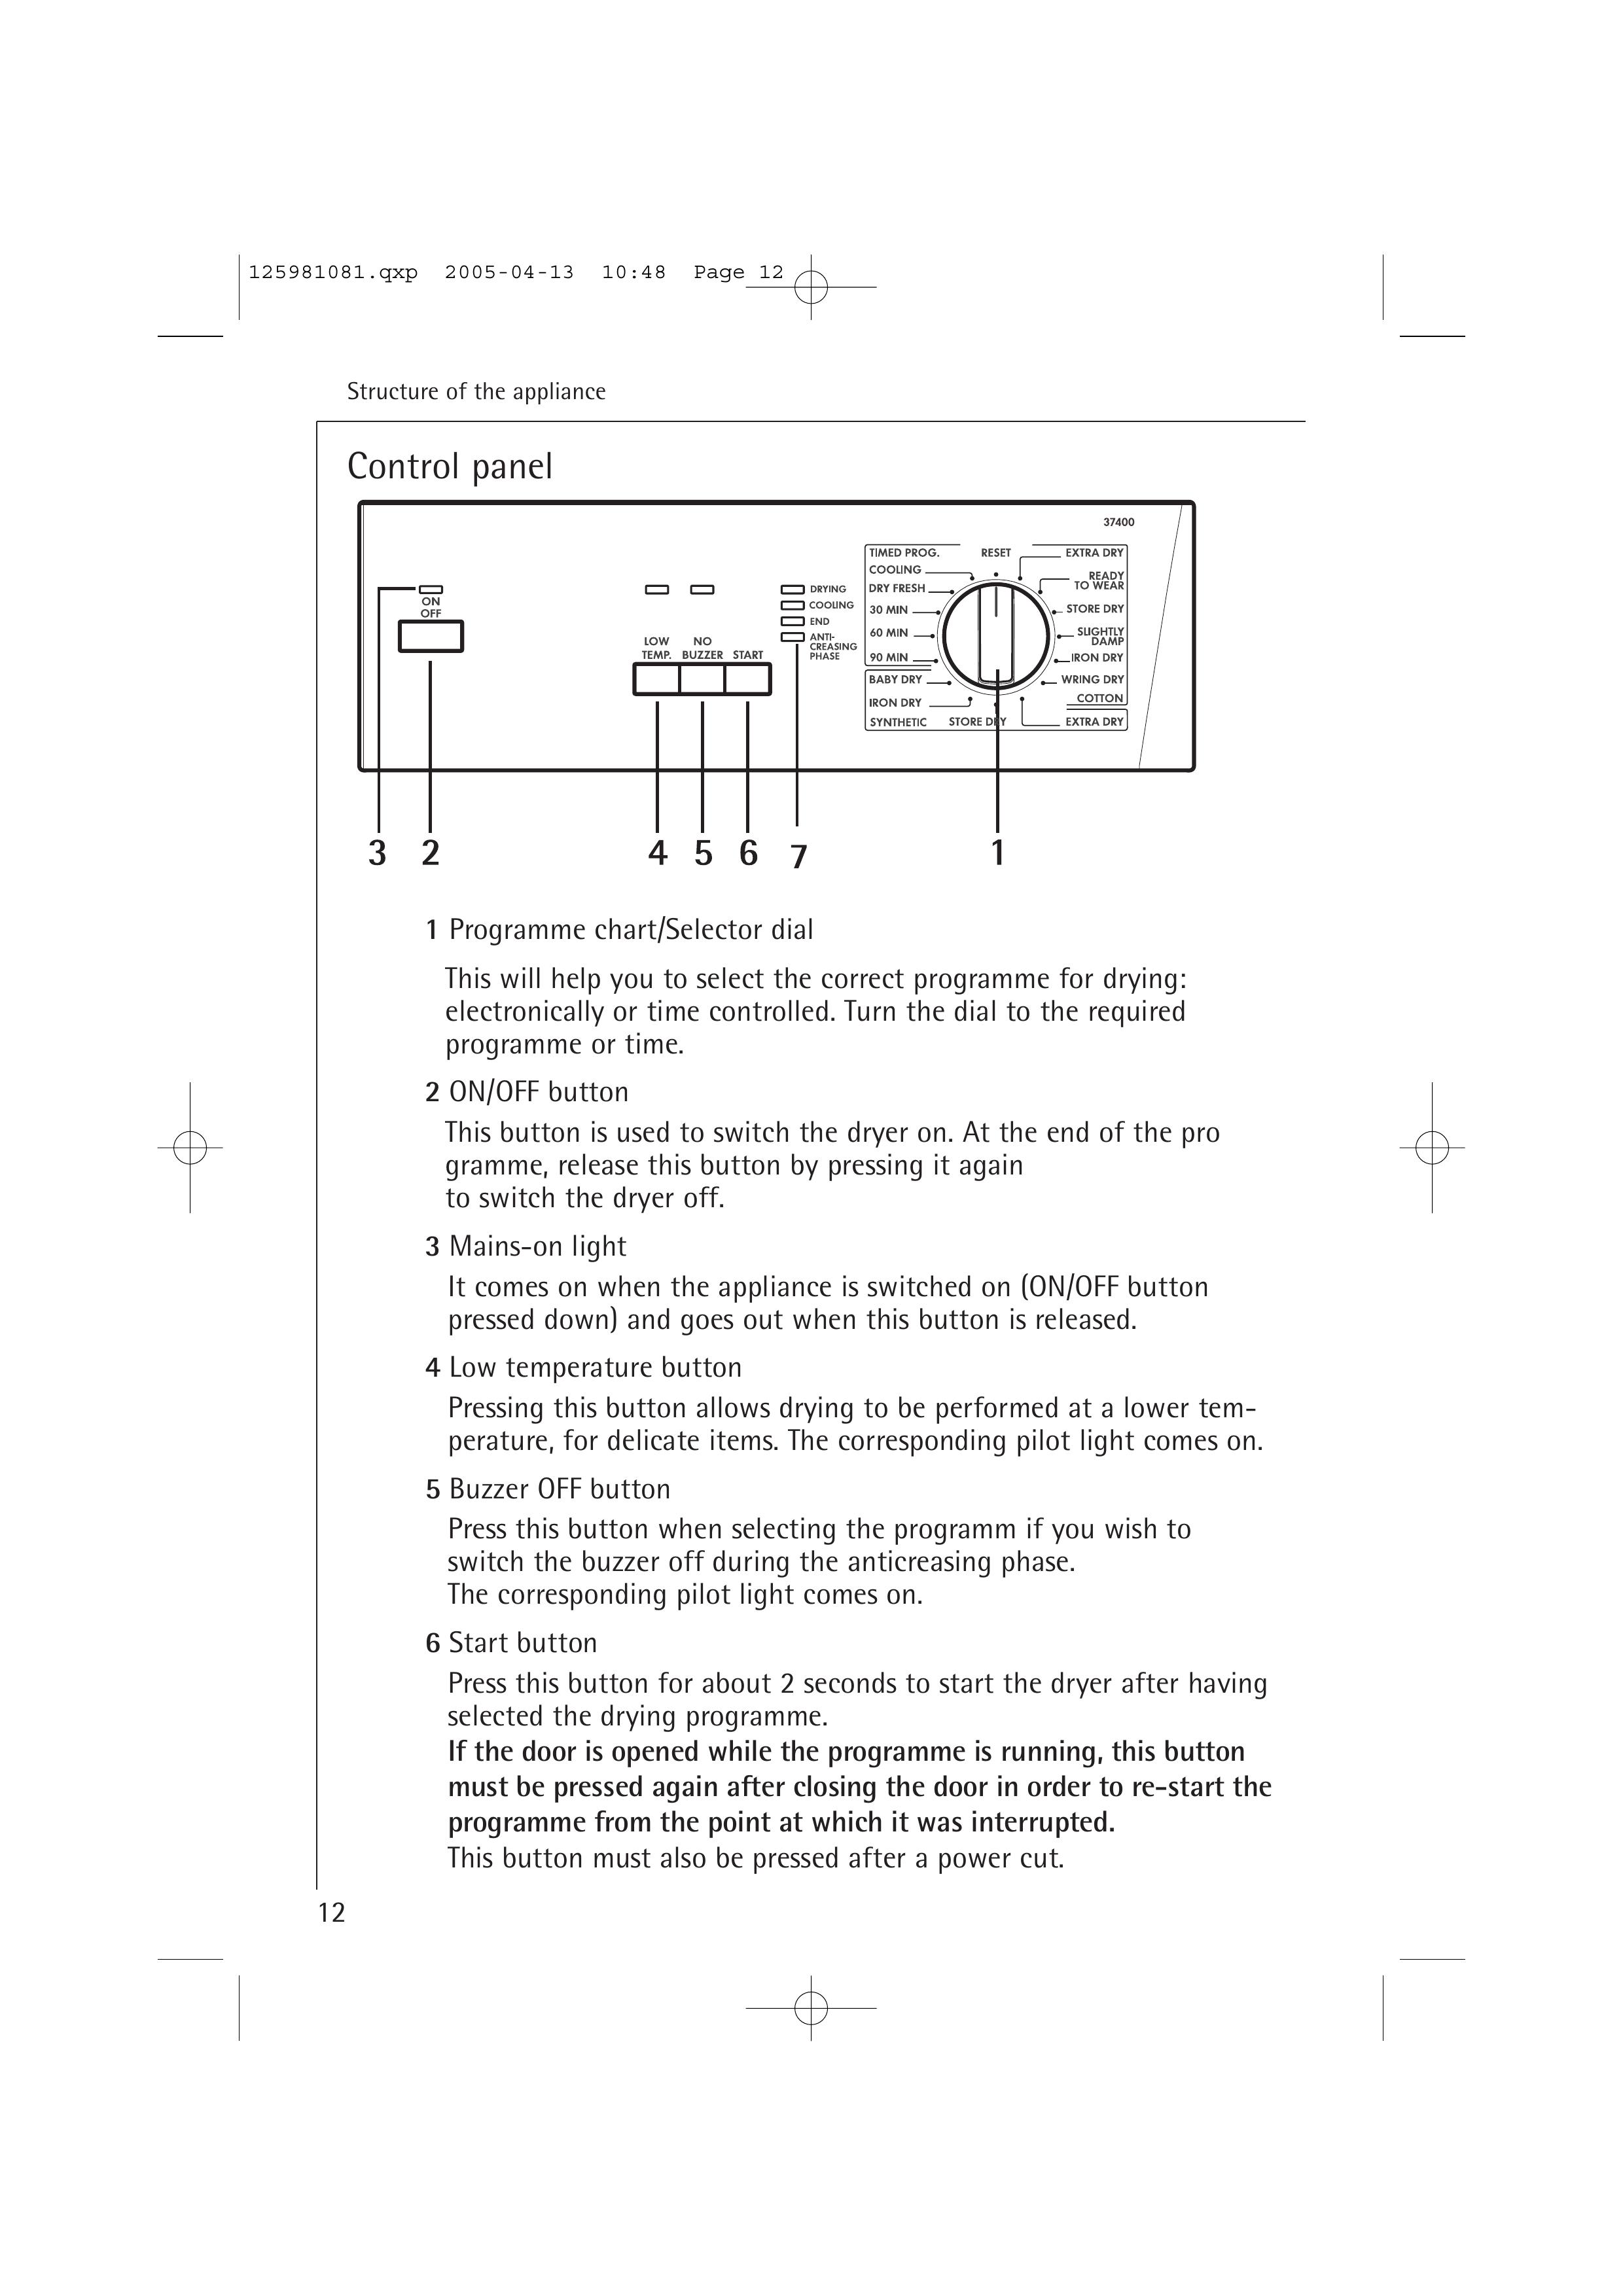 AEG T37400 Clothes Dryer User Manual (Page 12)